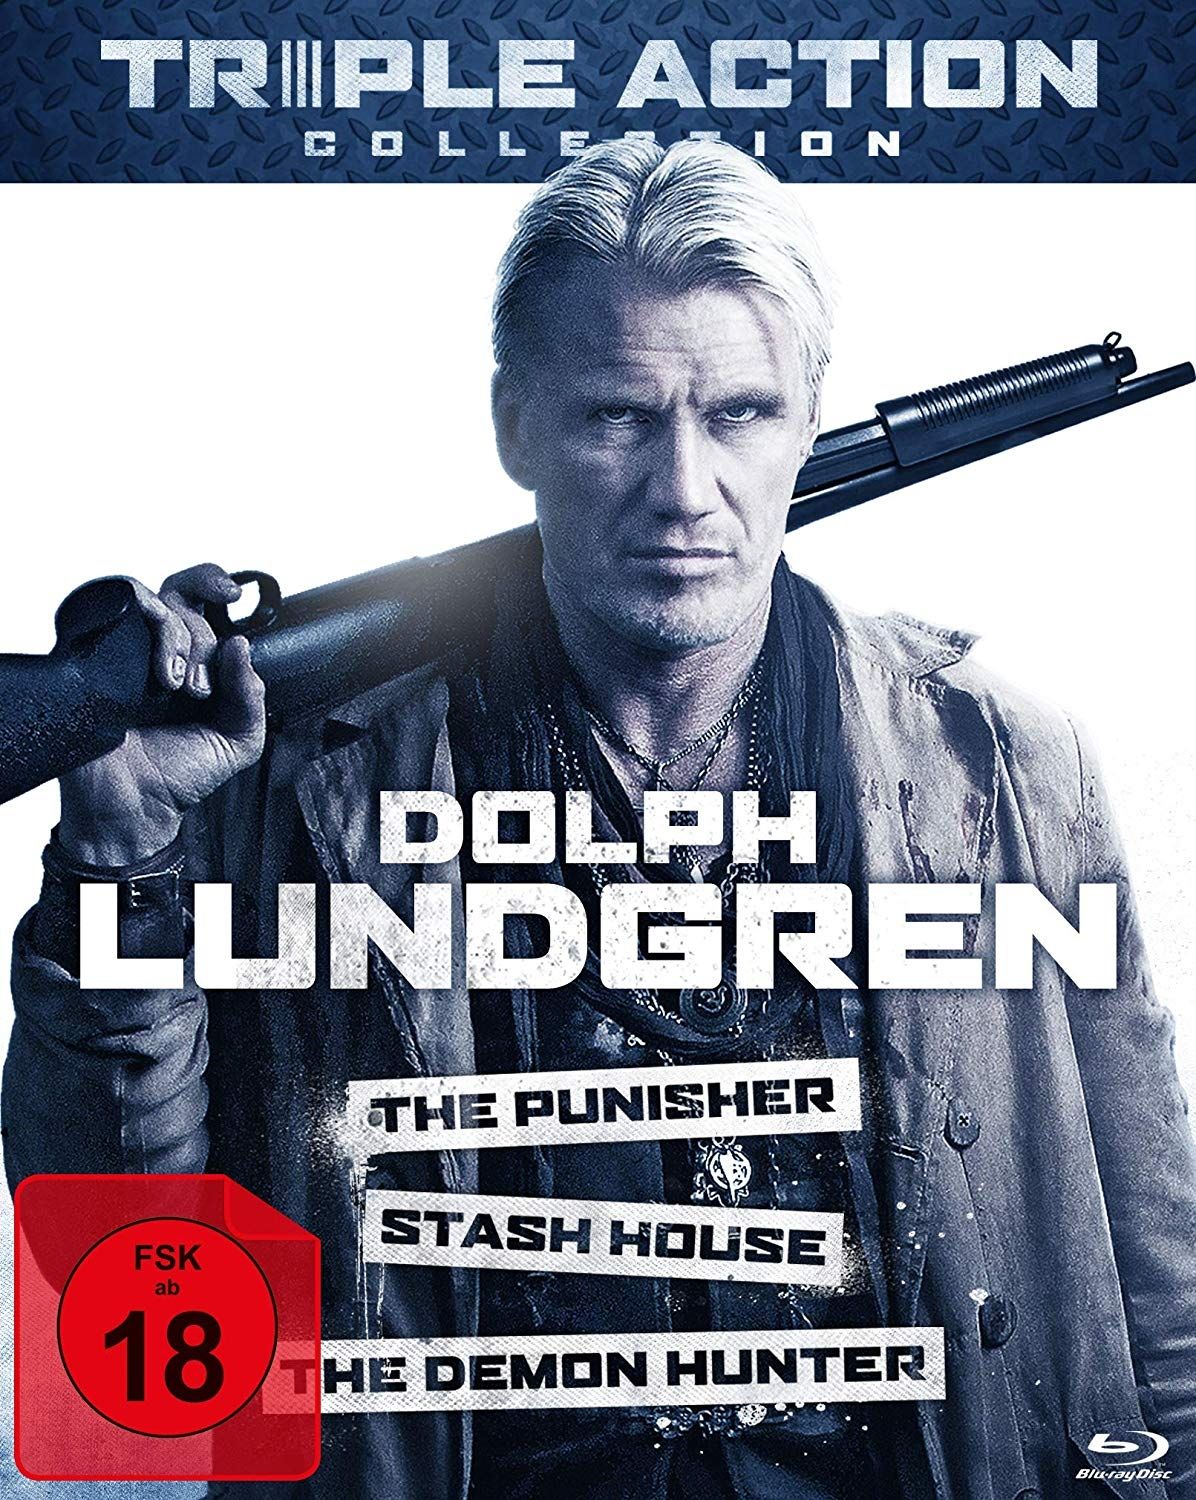 Punisher, The (1989) / Stash House / The Demon Hunter (Dolph Lundgren Triple Action Collection) (3 Discs) (BLURAY)